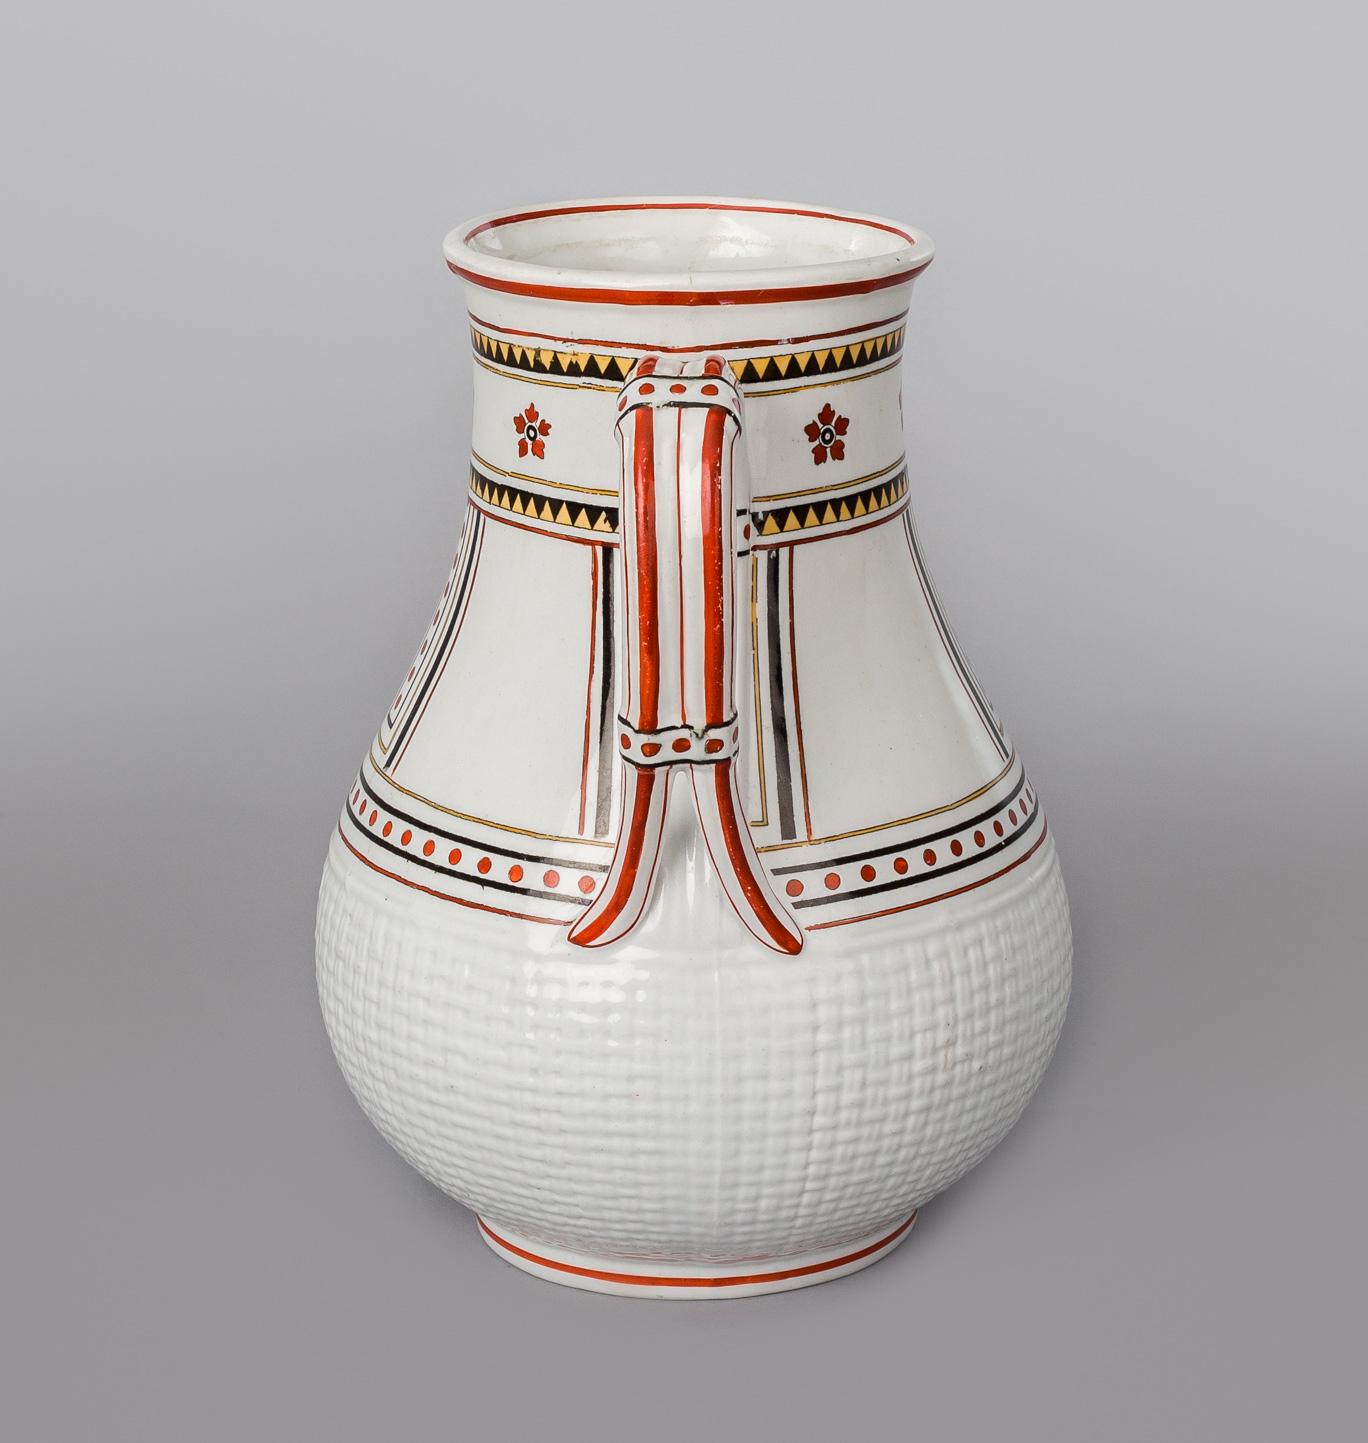 An Aesthetic Movement Minton pitcher or jug decorated with transferware geometric shapes in red, black and yellow on a white ground. It has a handle that splits at the bottom and there is no spout. The bottom is in a basket weave pattern. The